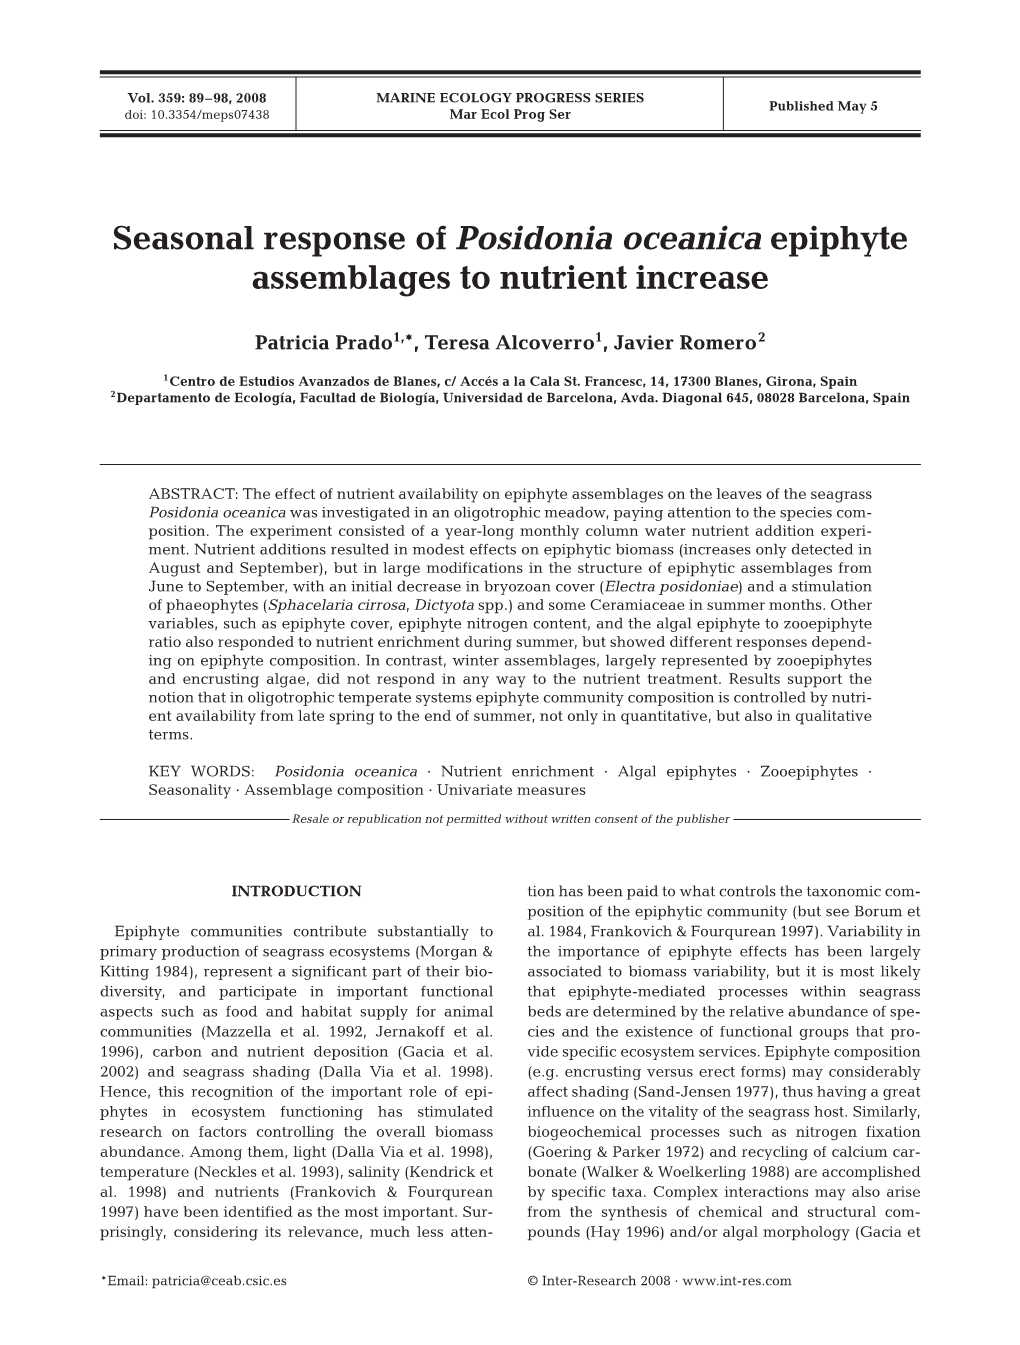 Seasonal Response of Posidonia Oceanica Epiphyte Assemblages to Nutrient Increase